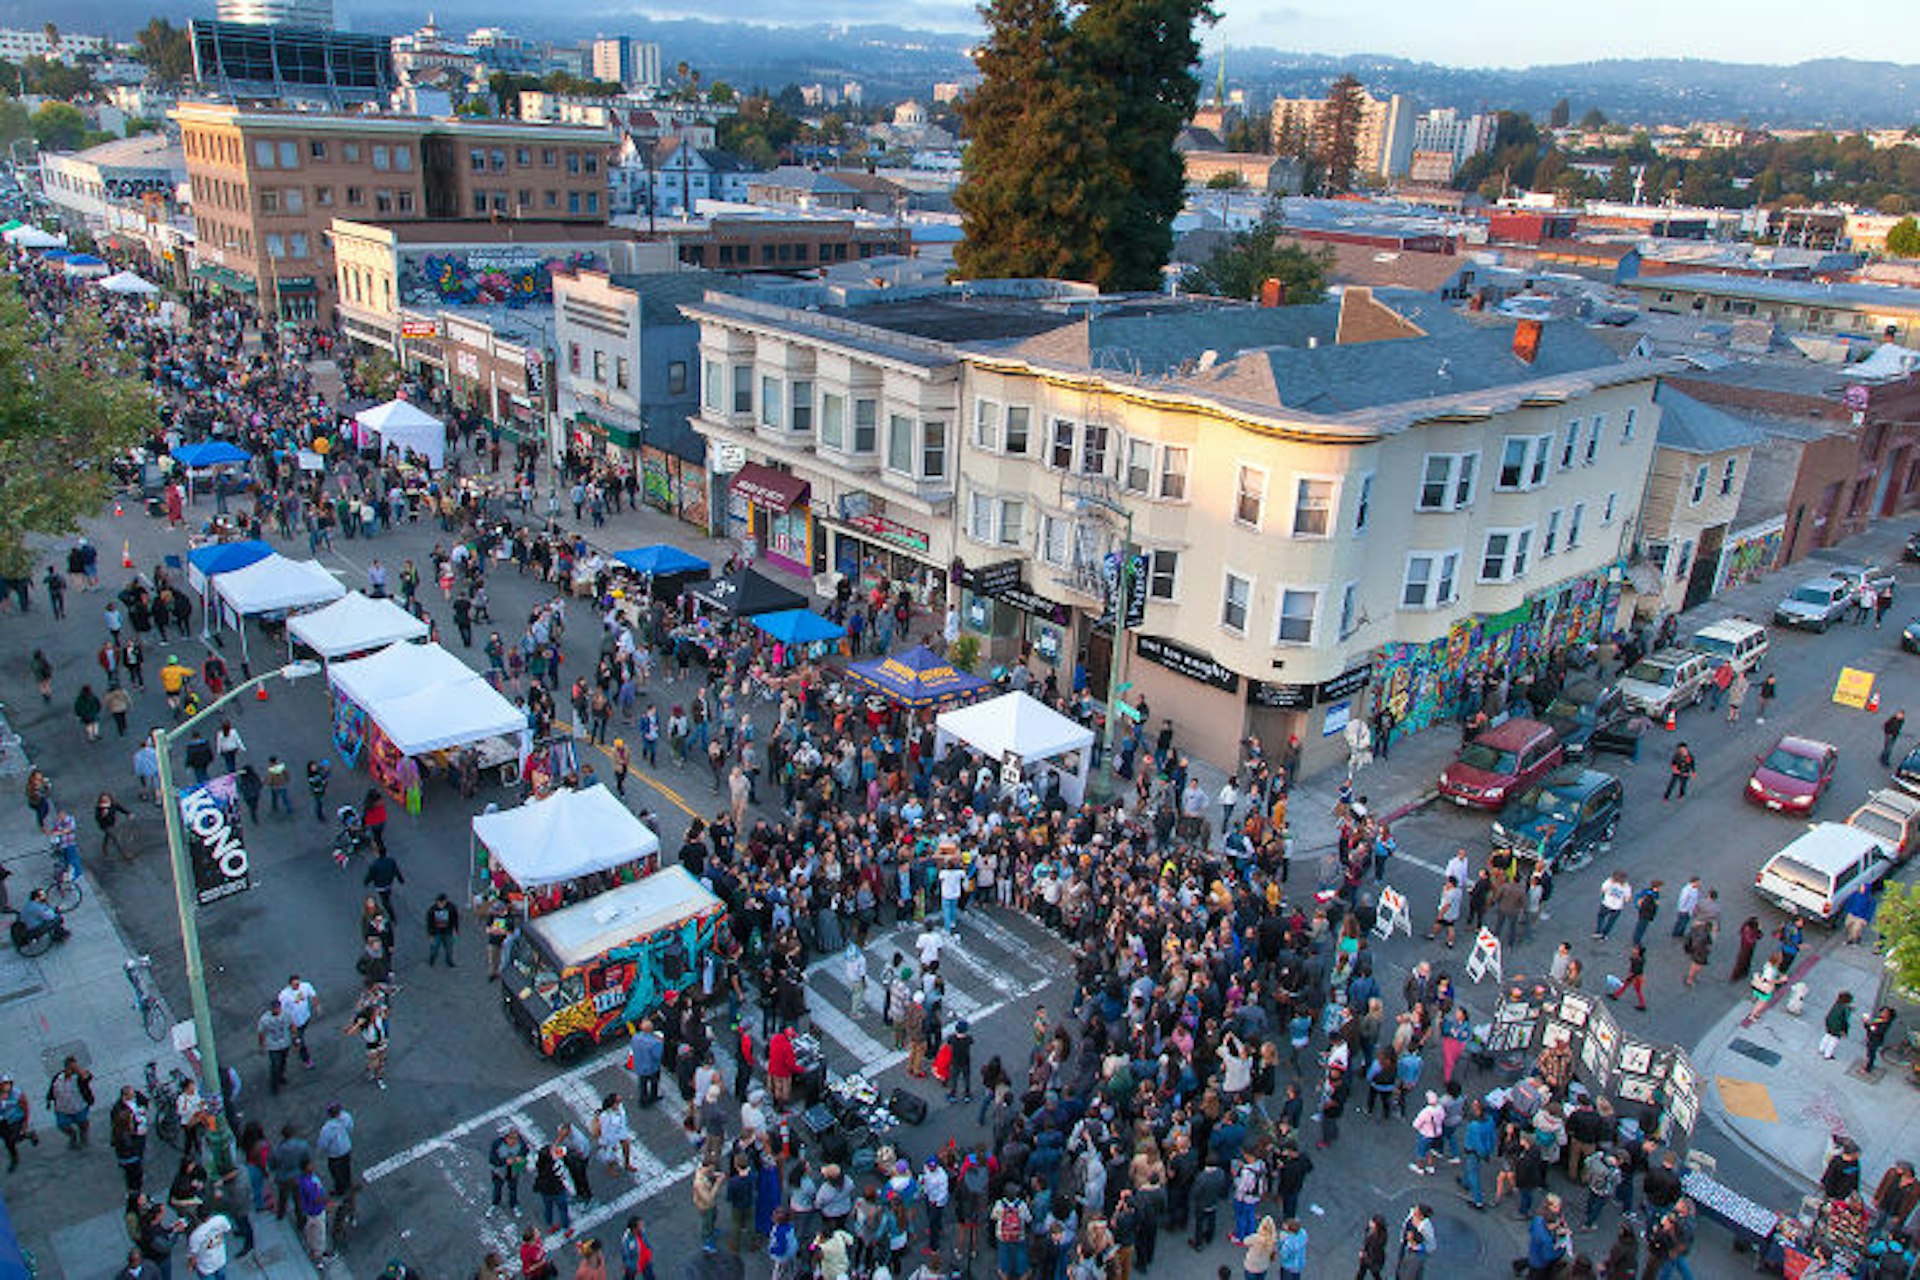 The first Friday of each month sees Oakland's creative residents take to the streets. Image by Greg Linhares / City of Oakland